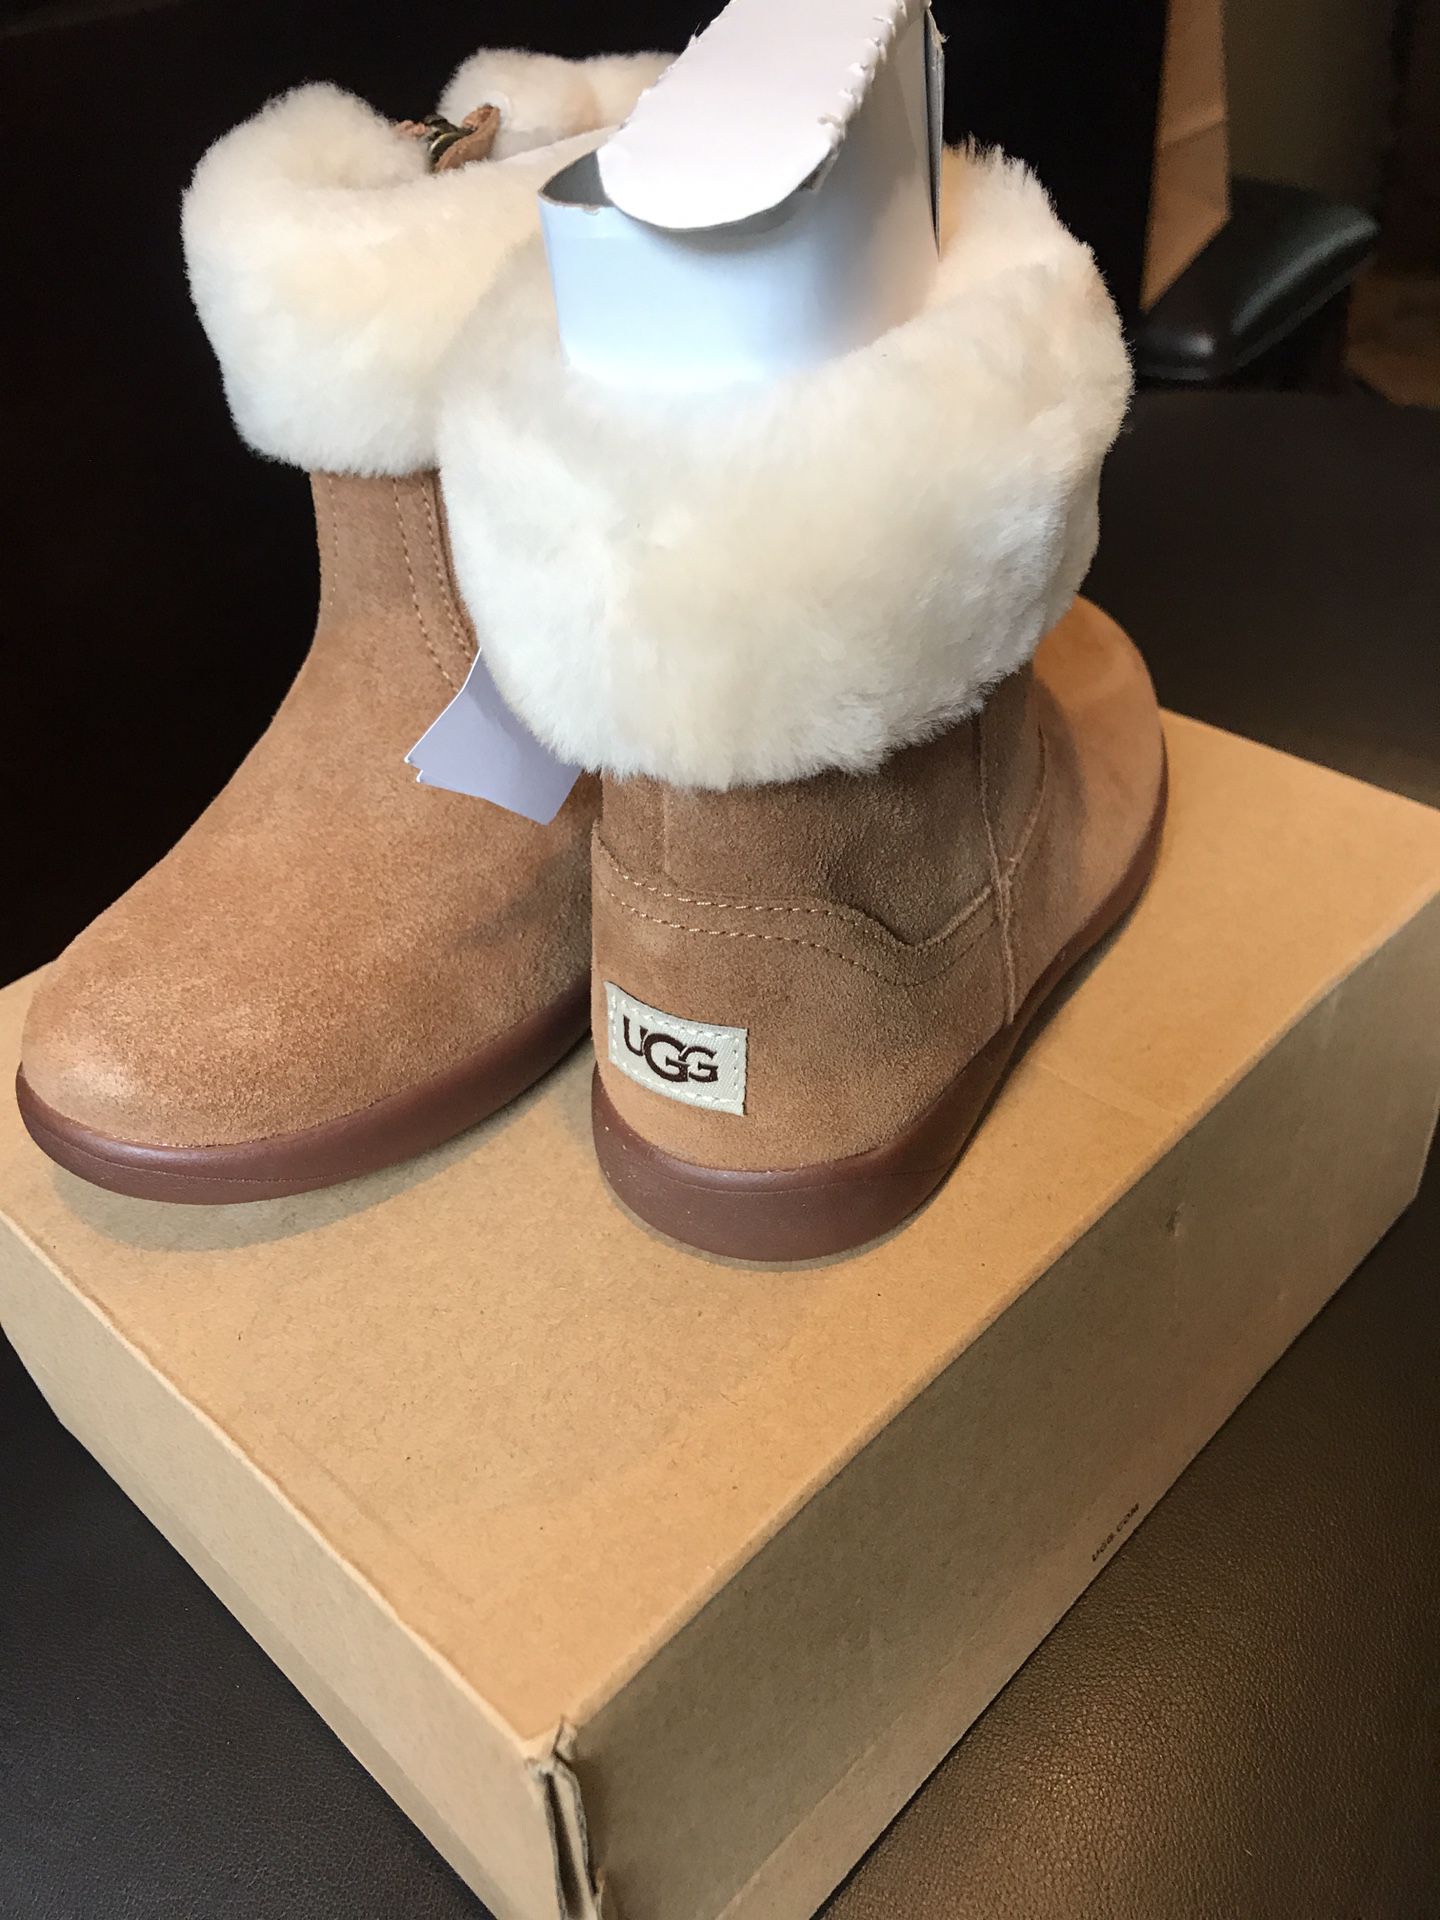 Brand new UGGs boots